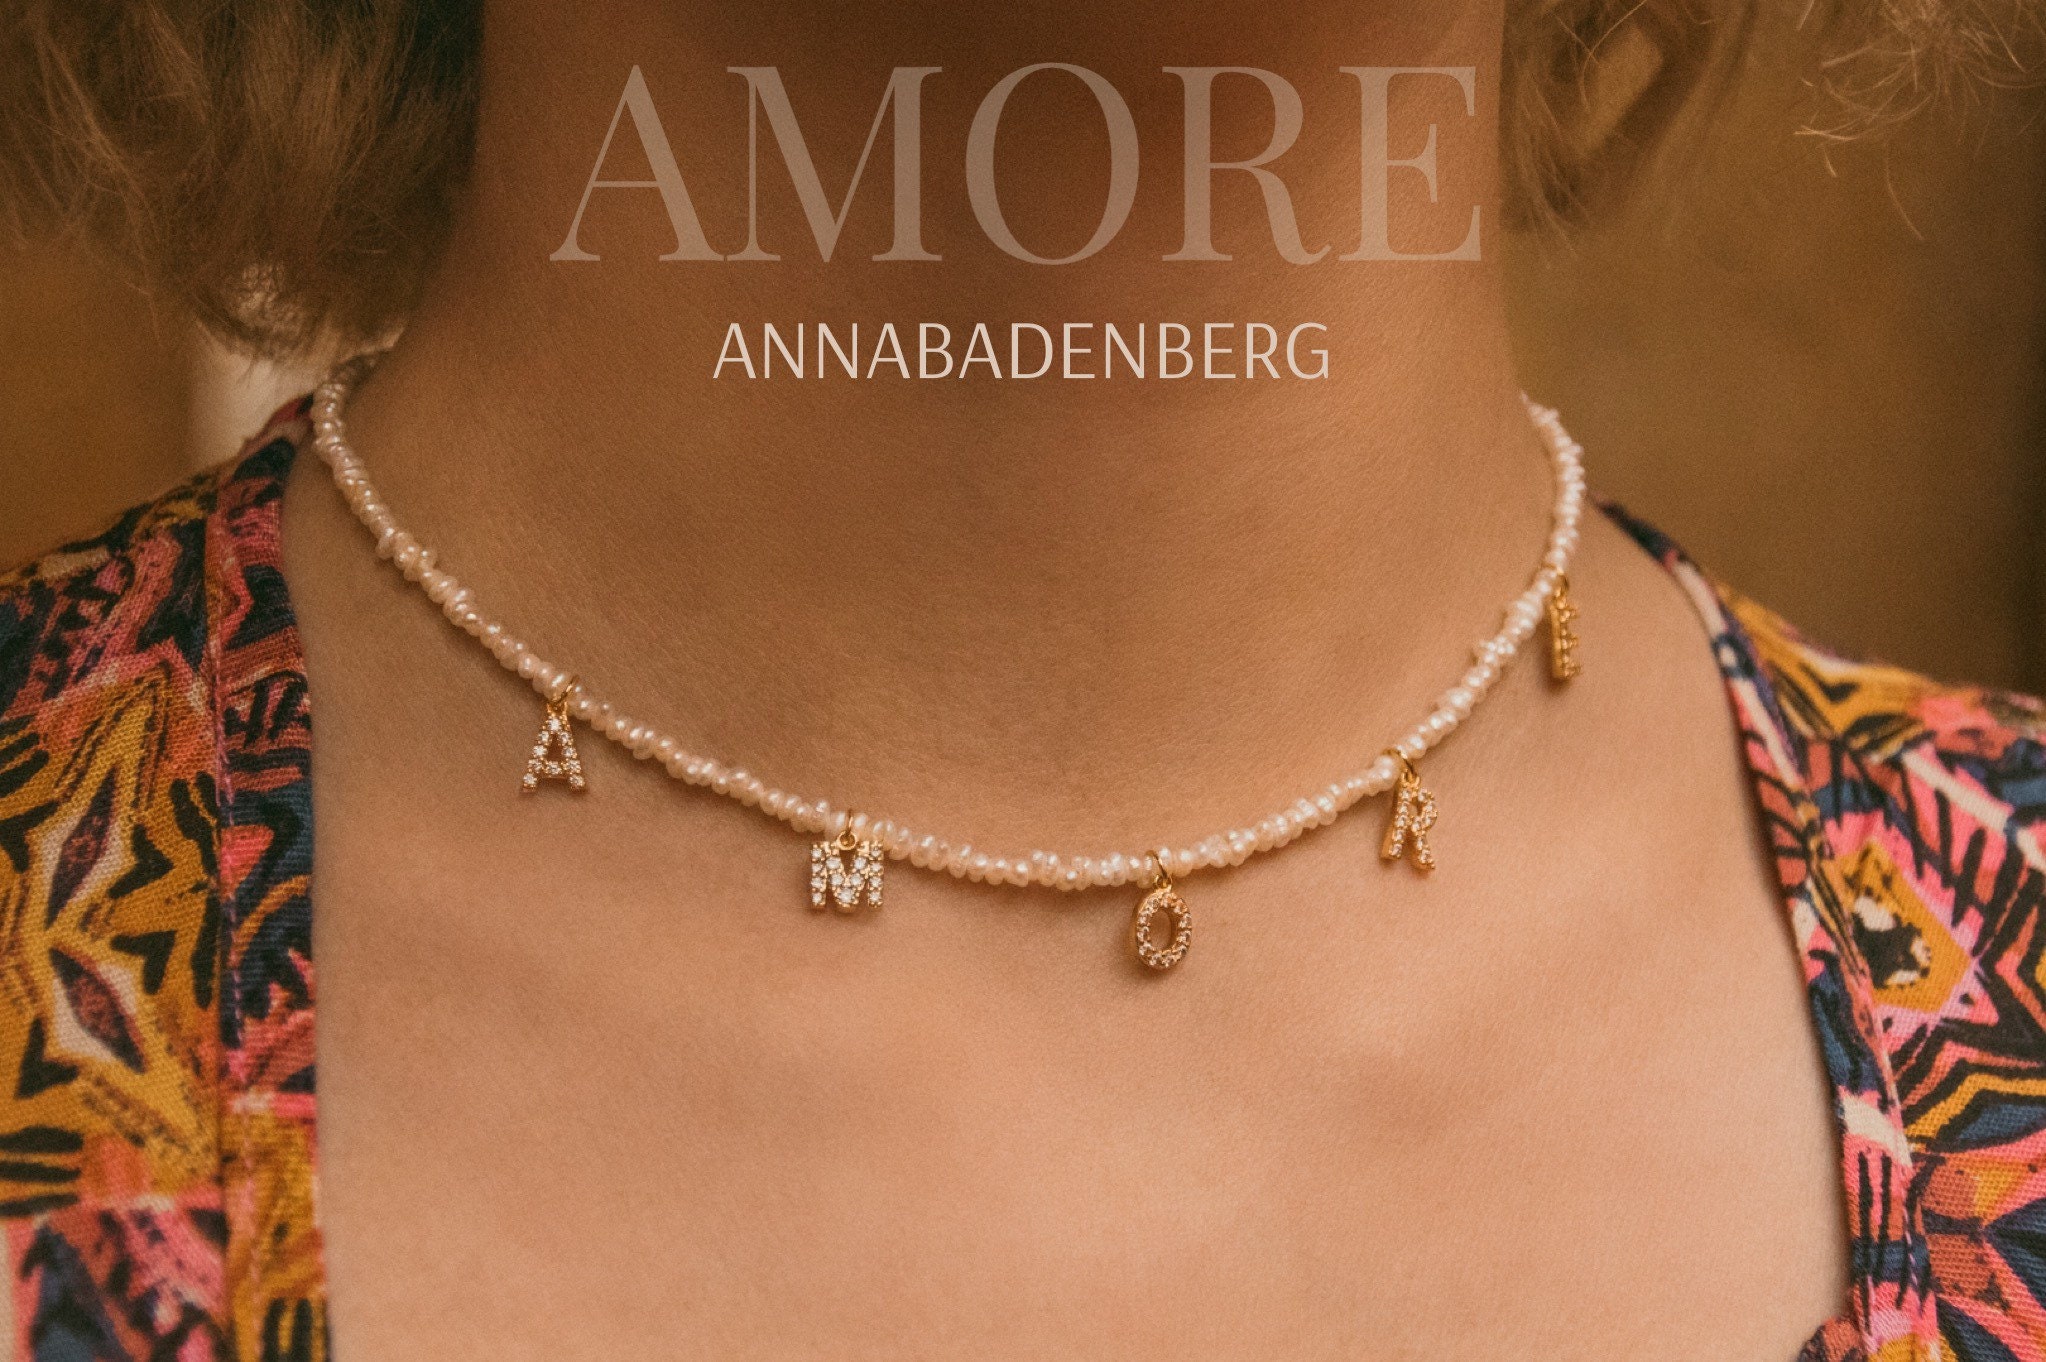 NECKLACE Choker Made of Cultured Pearls in White and Letter Charms  Gold-plated With Zirconia. All Metals Sterling Silver, 18k Gold Plated -  Etsy